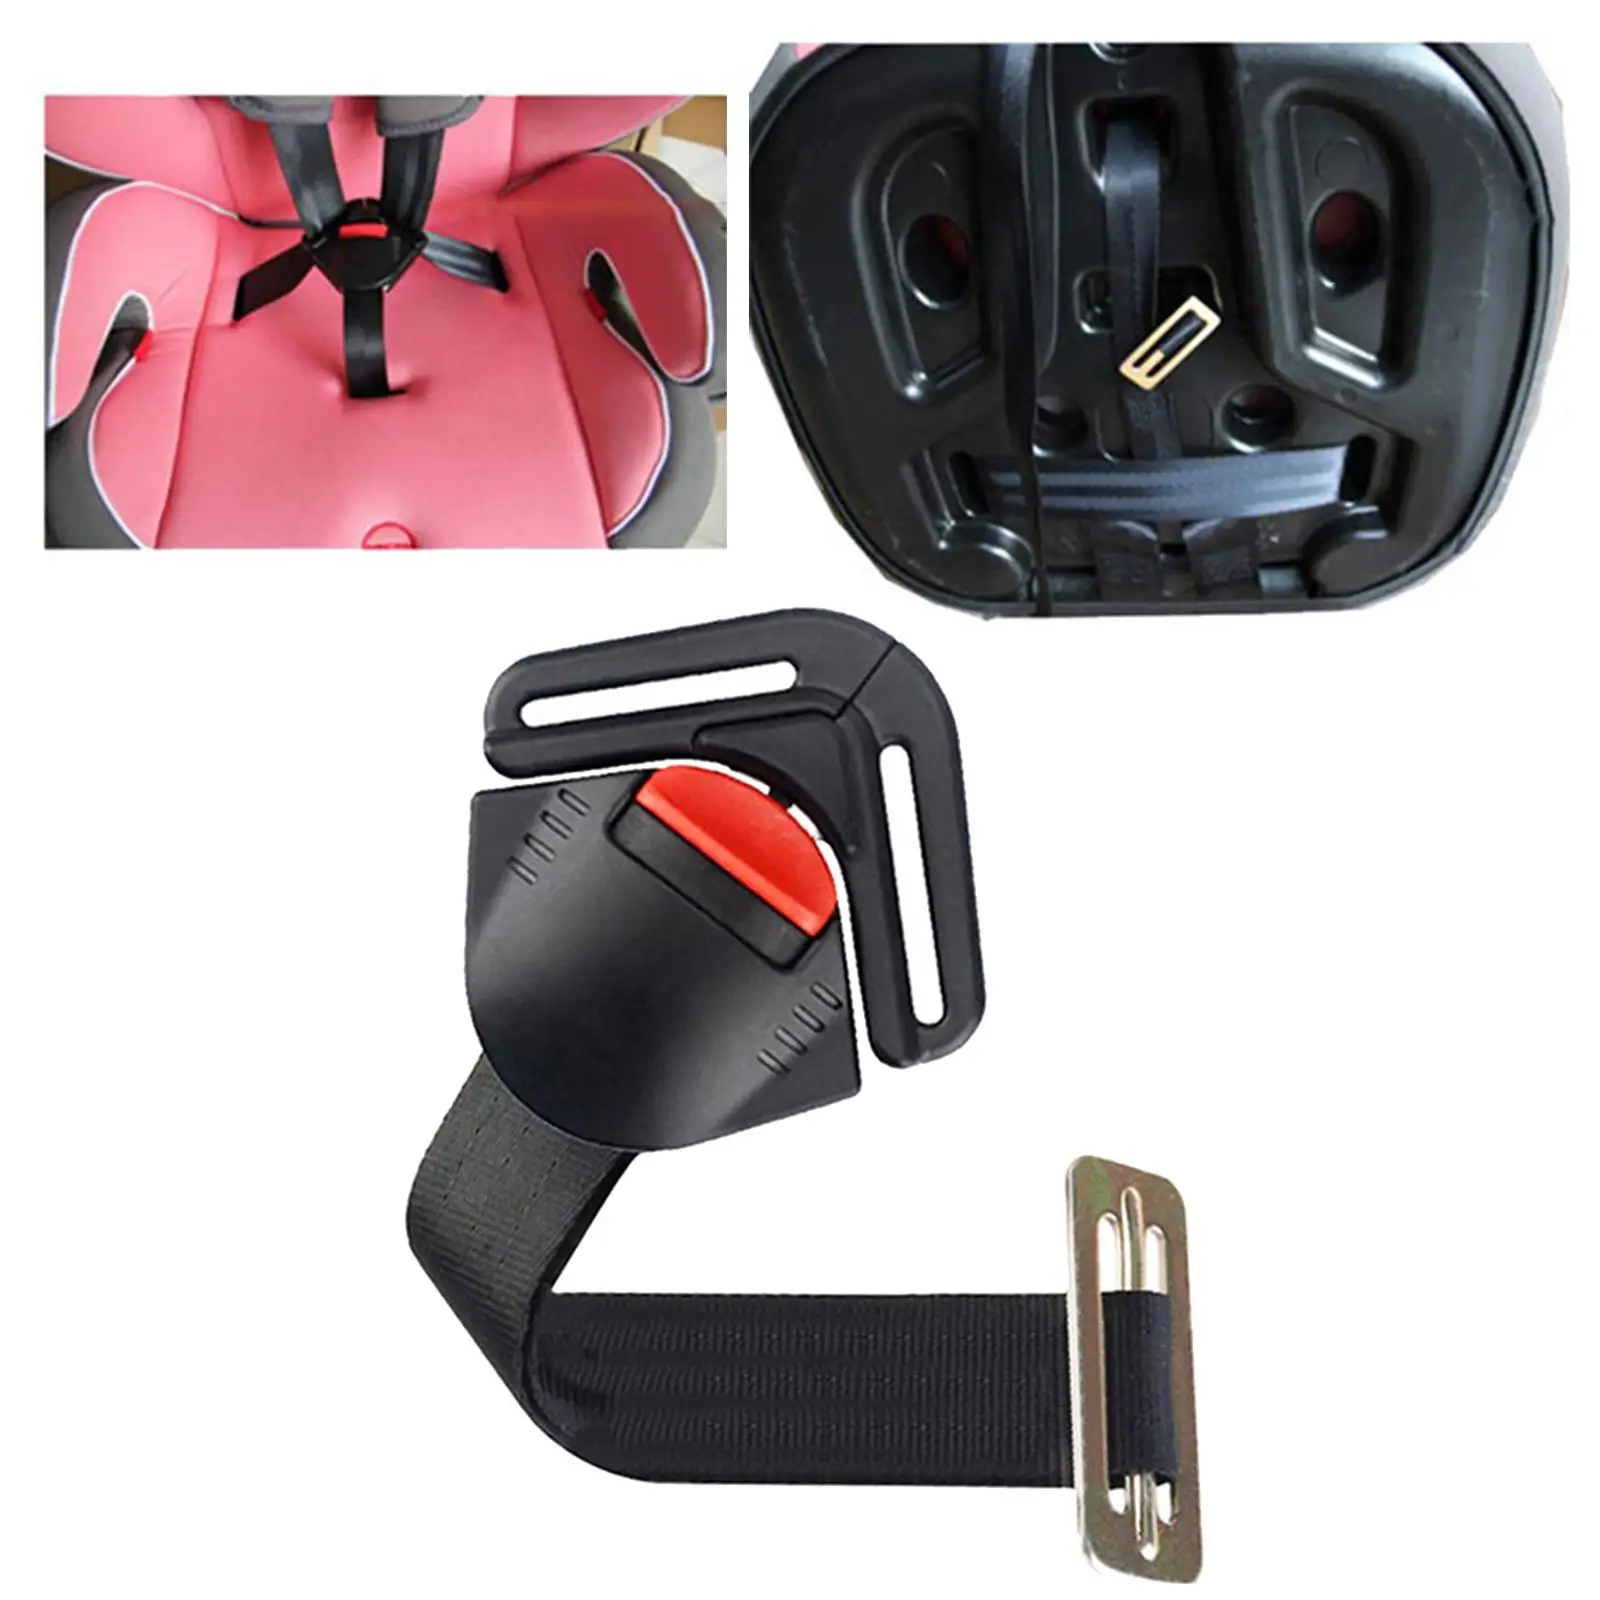 Car Child Seat Safety Belt Buckle 5 Point Toddler Harness Clip Fixed Lock Buckle for Pram Buggy